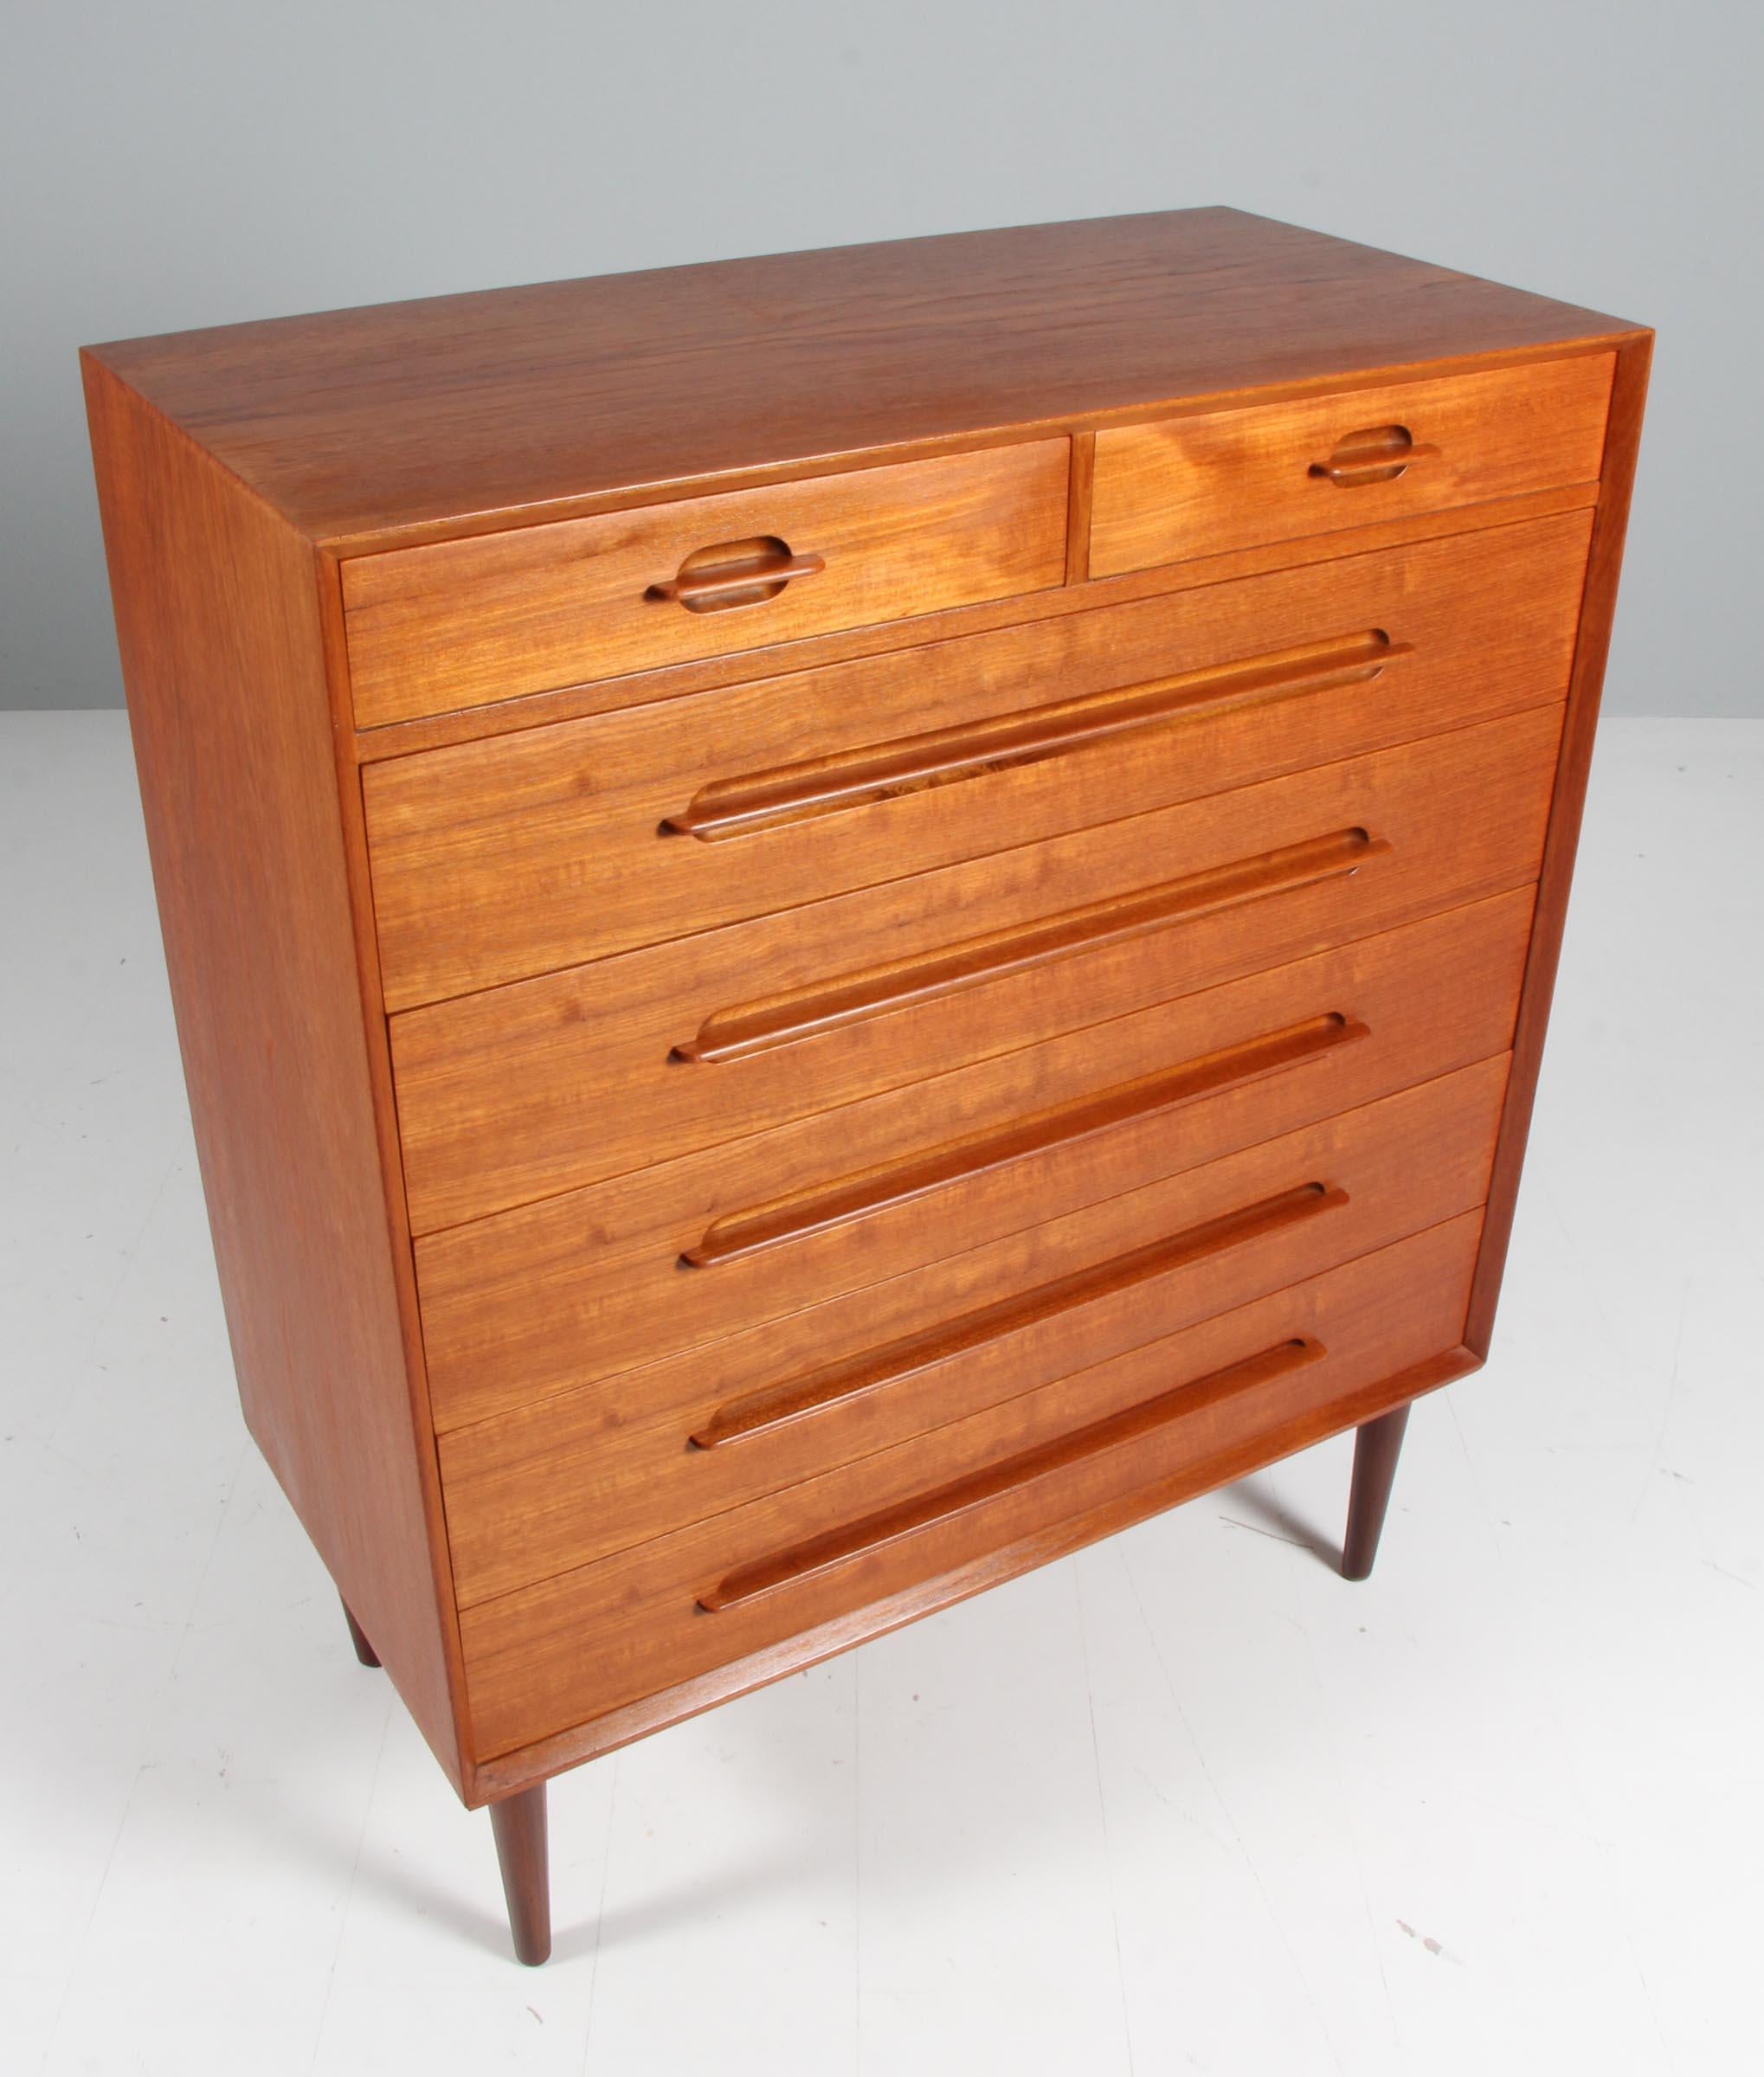 Very rare chest of drawers / bureau model 91 designed by Ejvind A. Johansson. Produced by Gern Møbelfabrik in Denmark.

